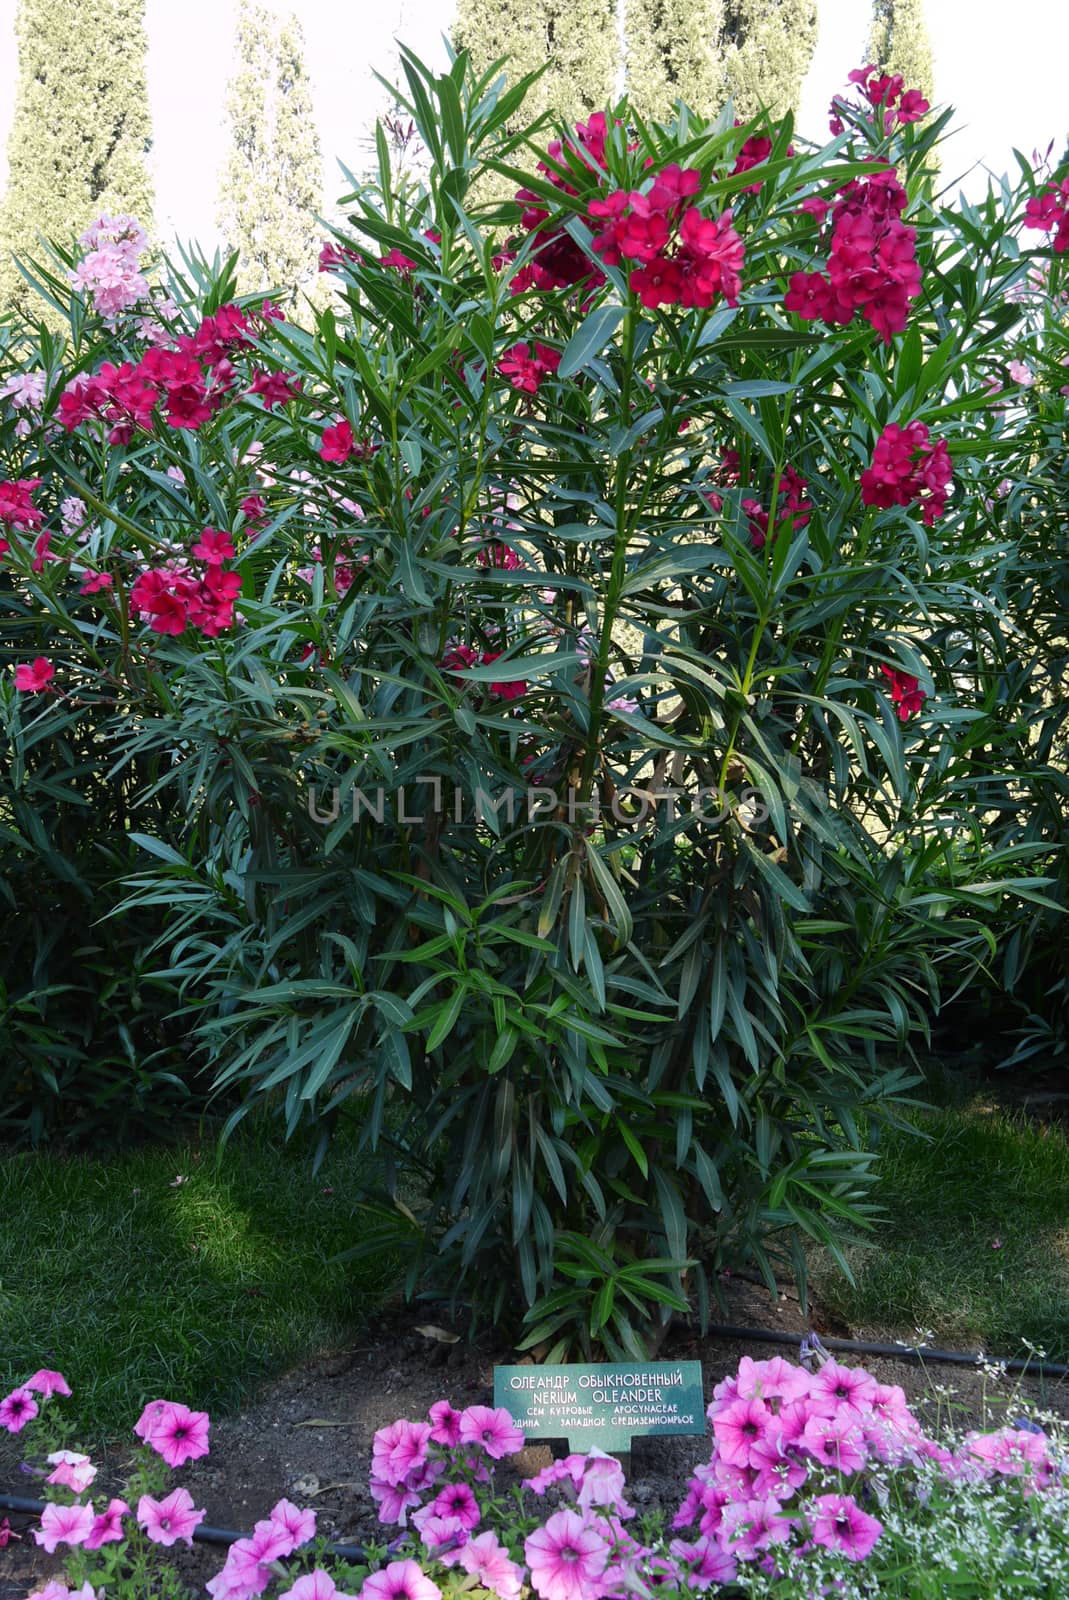 A tall bush with long stems and green leaves of beautiful red flowers with small petals of oleander ordinary.